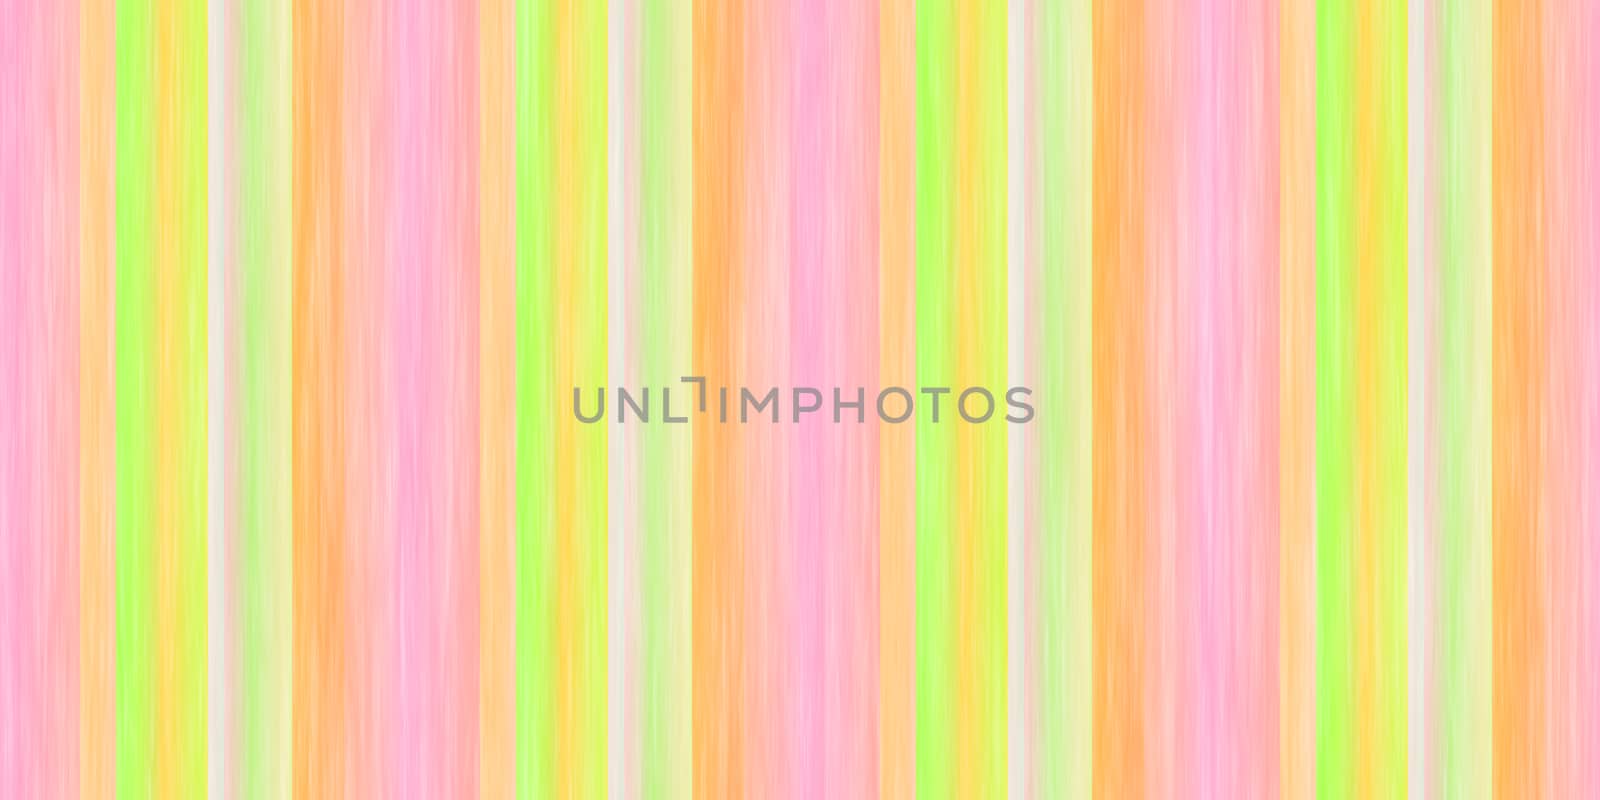 Yellow Pink Lime Scrapbook Sherbert Background. Bright Colored Crumpled Textures. Handmade Scratched Crumpled Paper.